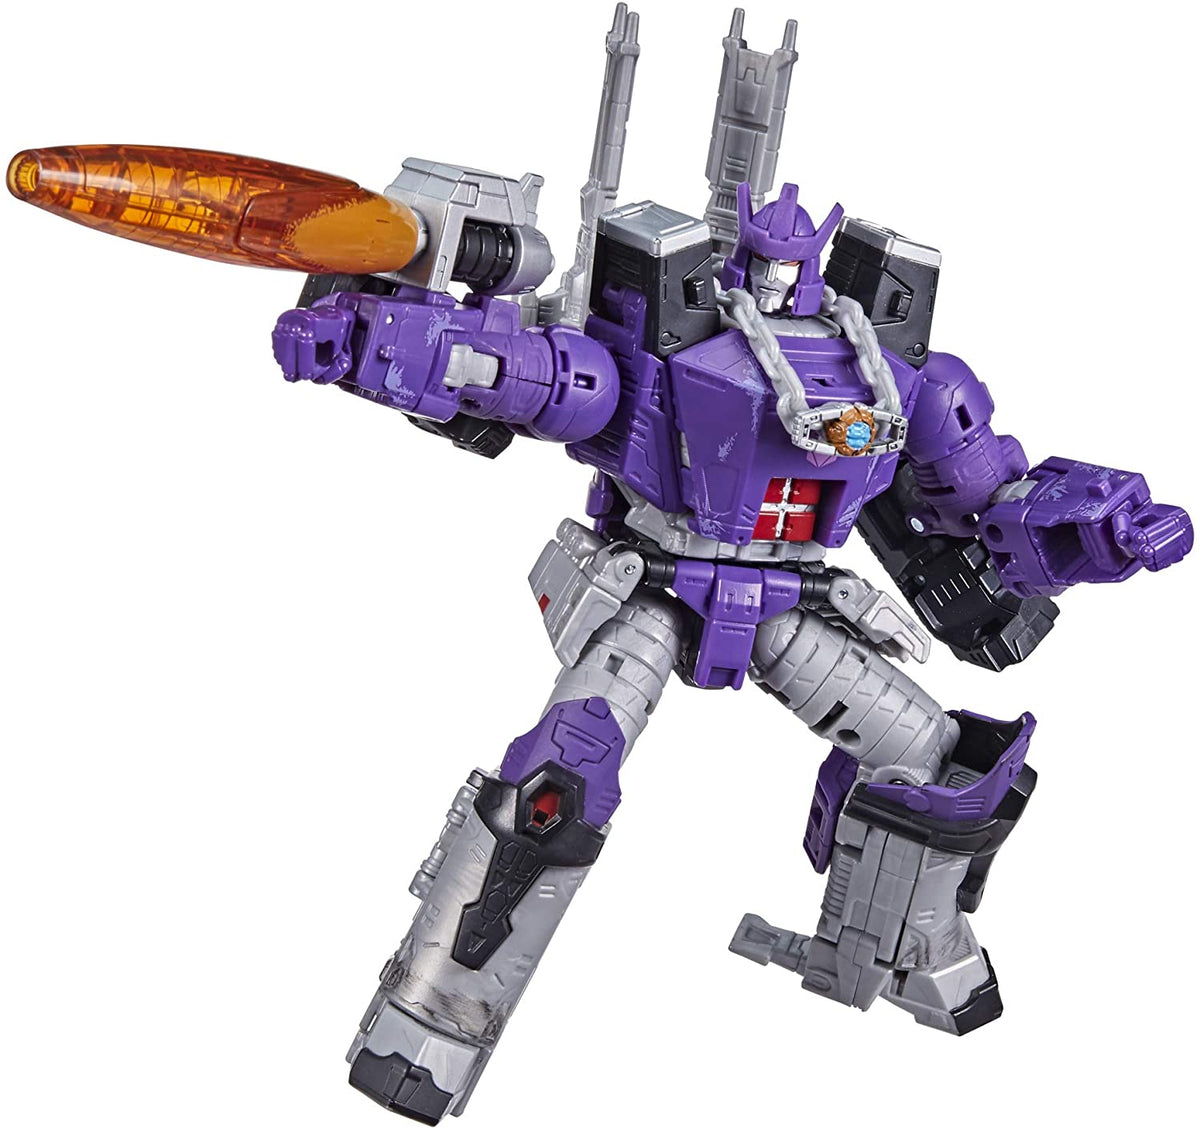 Transformers Generations War for Cybertron: Kingdom Leader WFC-K28 Galvatron Action Figure